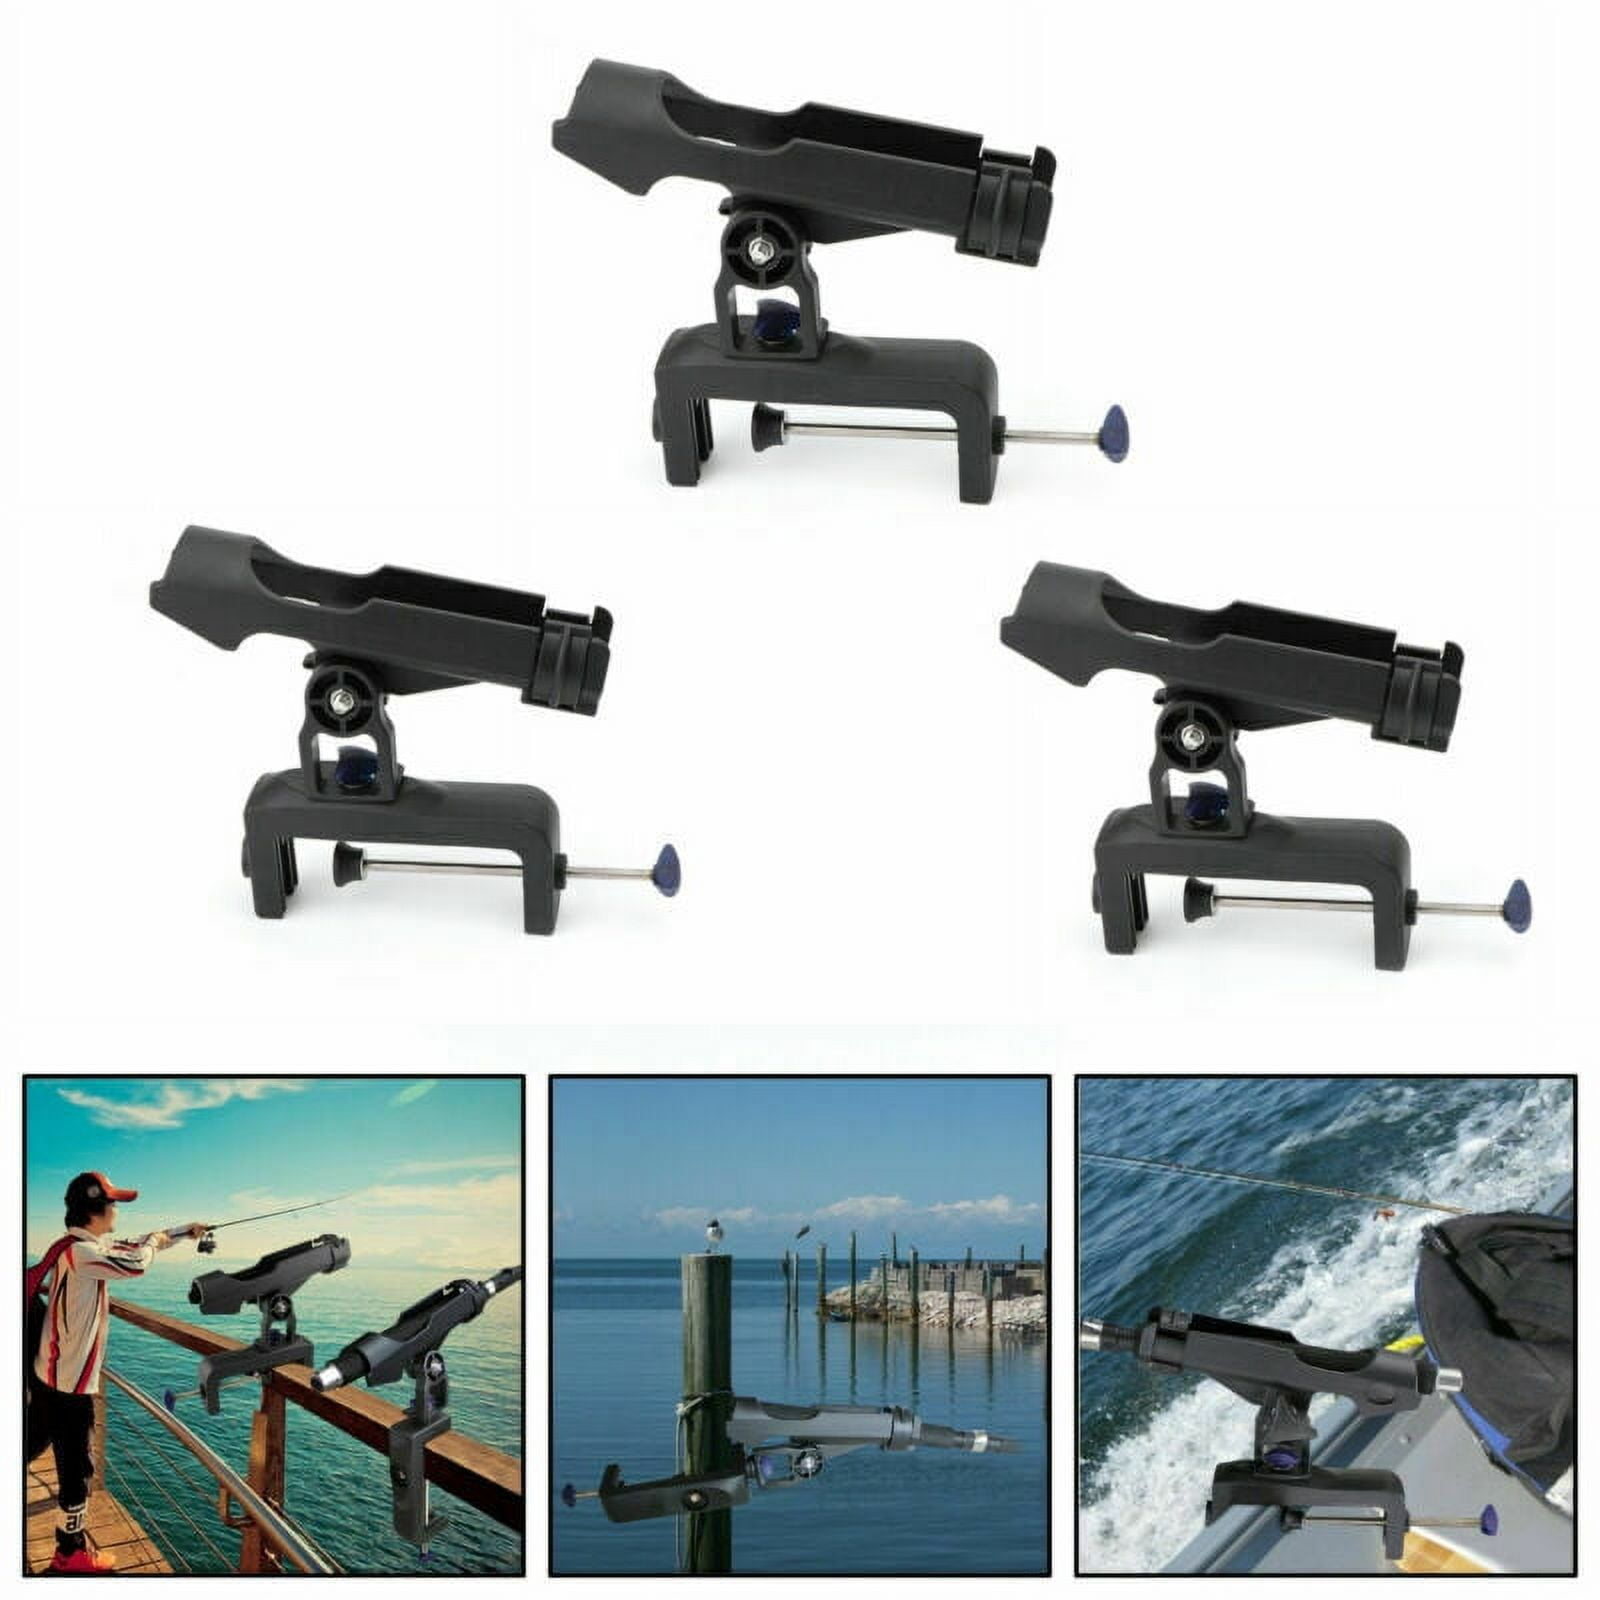 2-DAY Motor Genic Adjustable Boat Fishing Pole Rod Holder Clamp-on Rail  4.7inches Fit for Kayak 